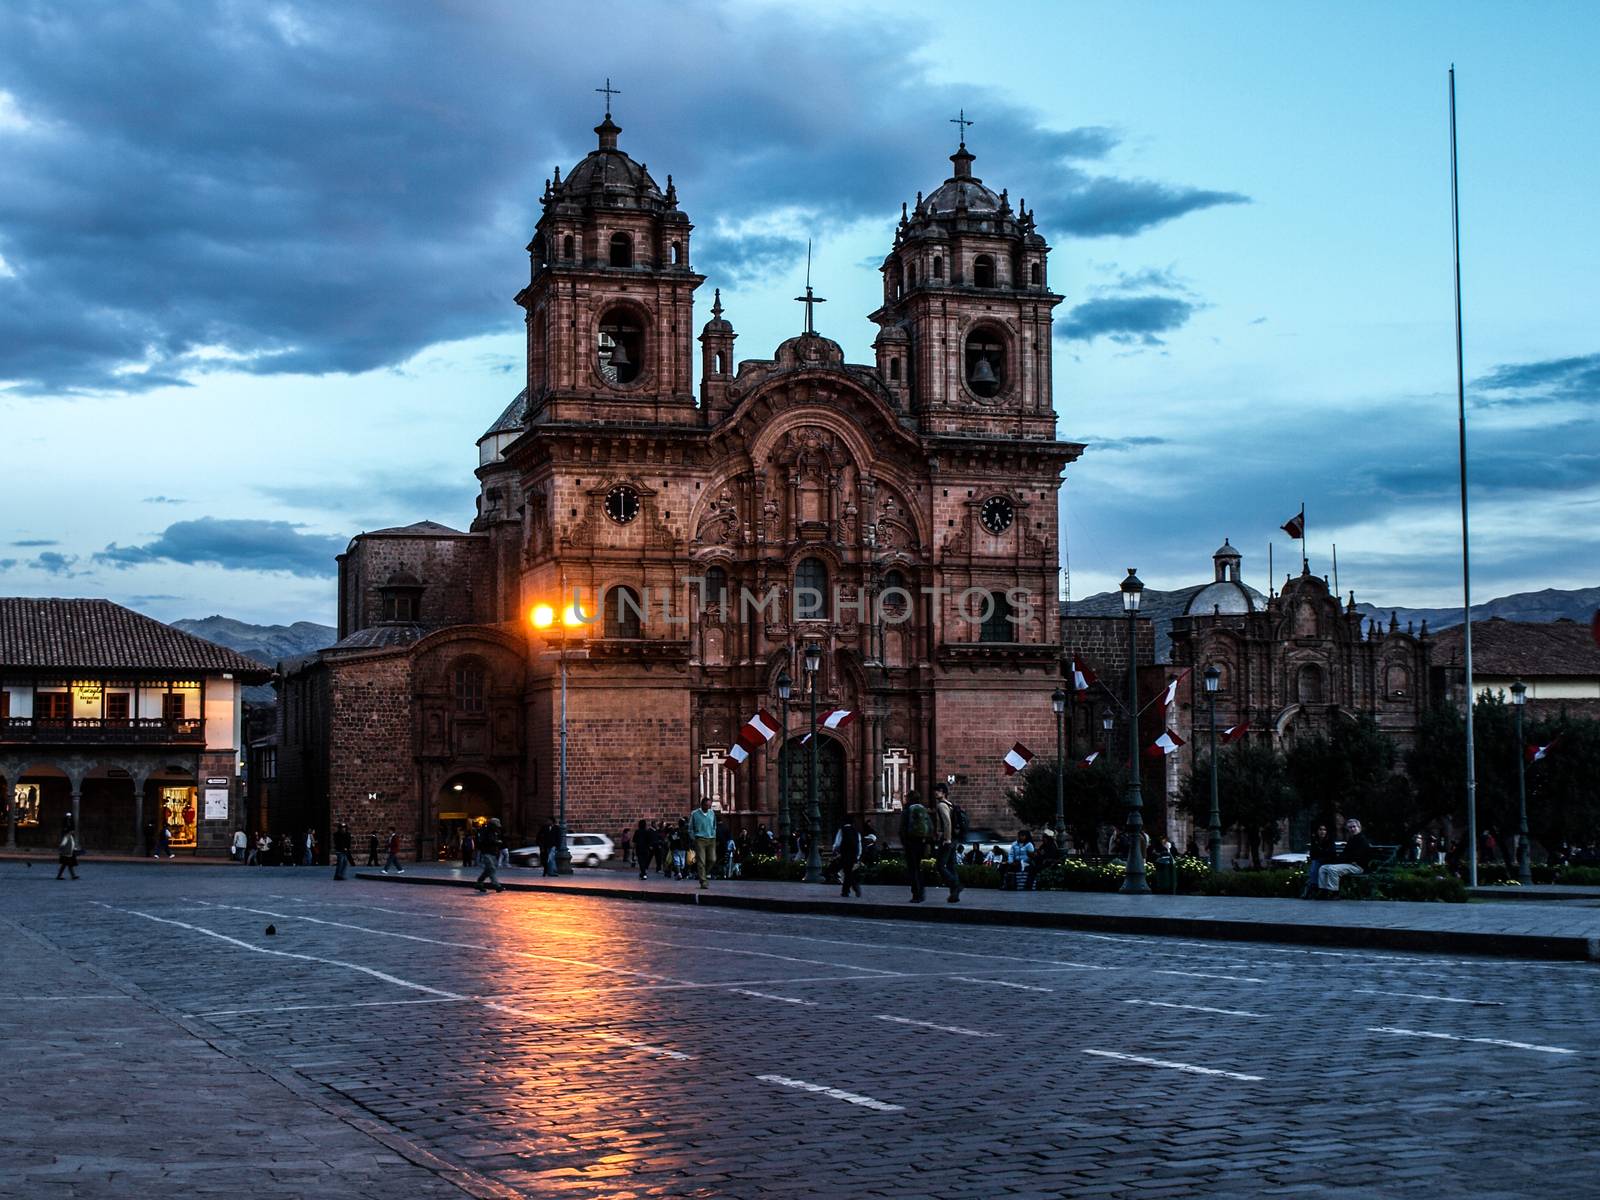 Curch at the Main Square - Plaza de Armas by pyty